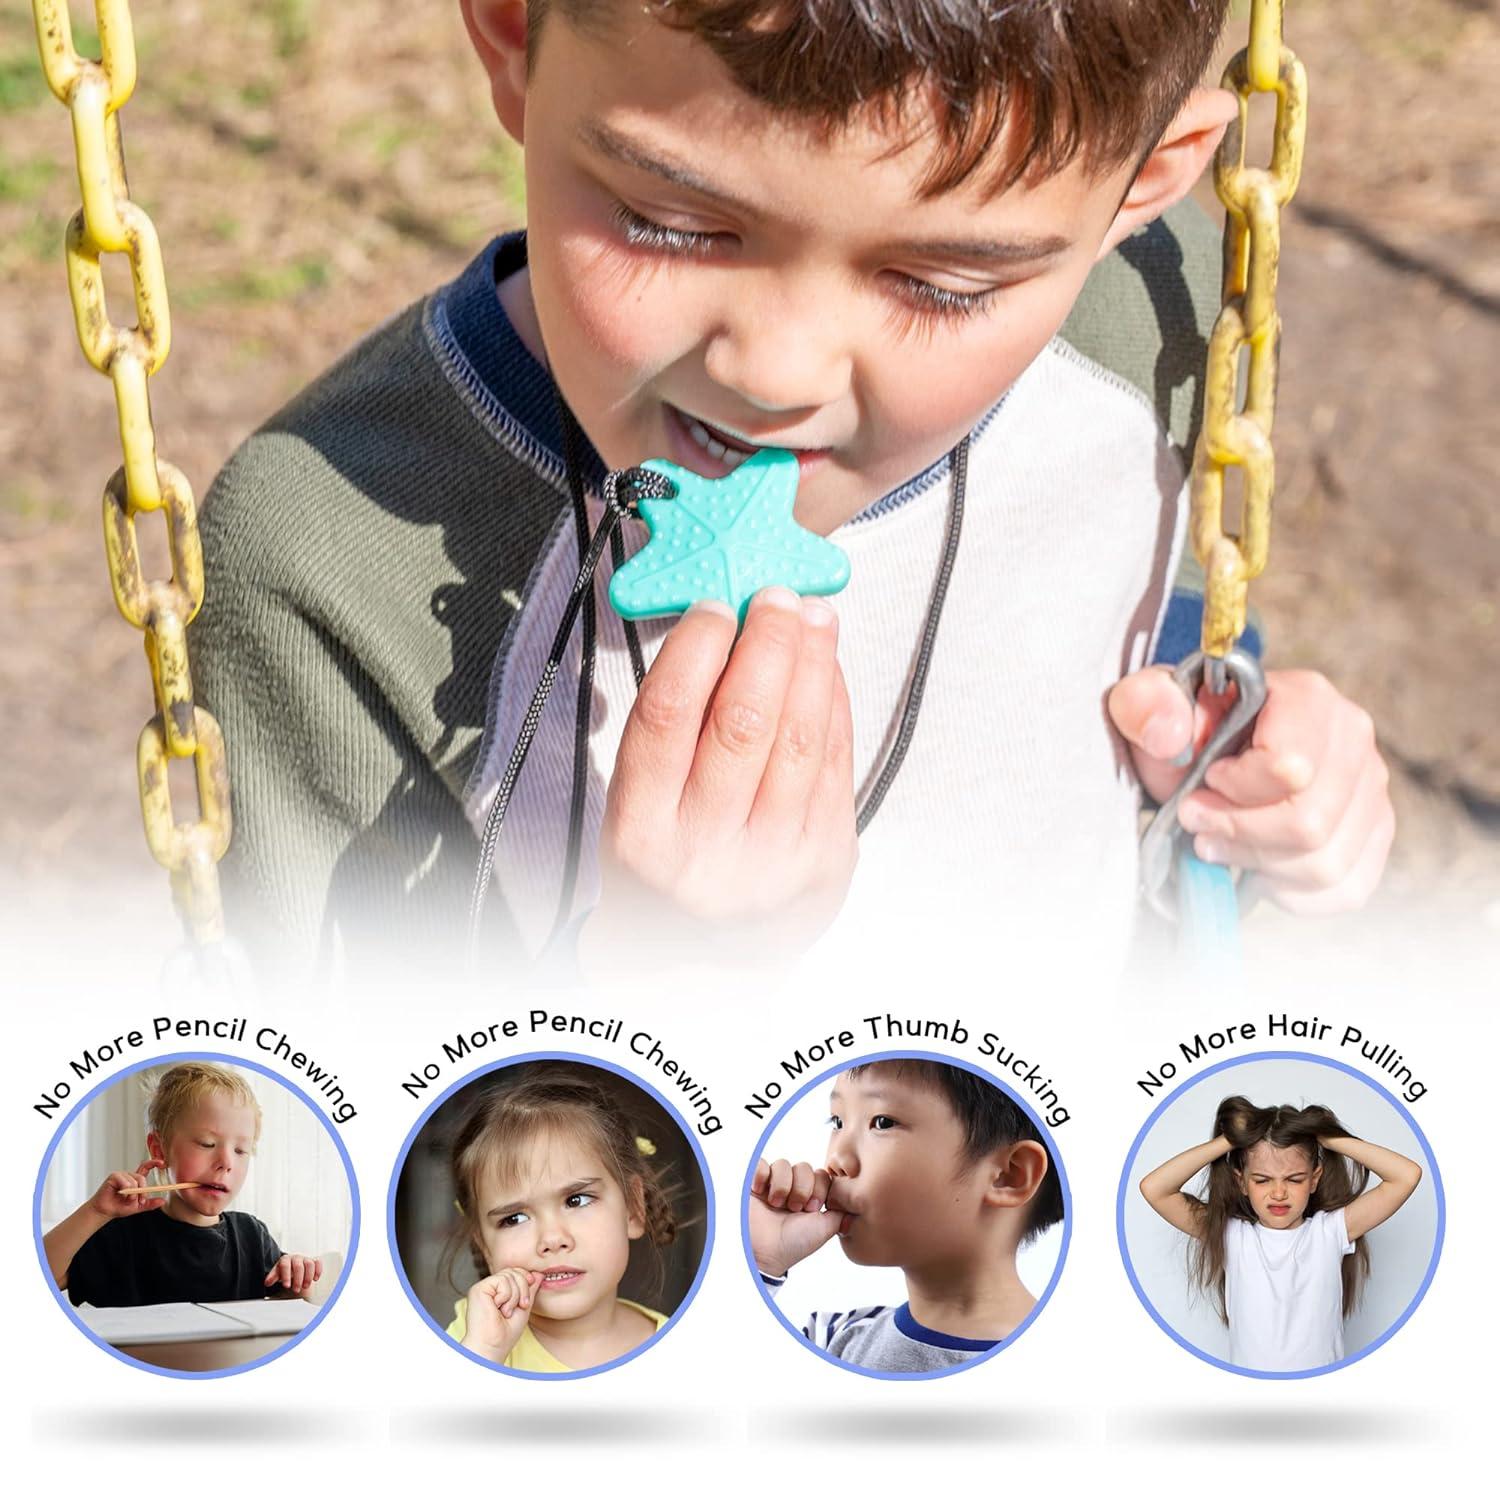 Amazon.com: Special Supplies Chewy Jewelry Sensory Necklaces and Bracelets,  16 Pack, Soft and Flexible Silicone, Interactive Stress and Anxiety Relief  for Kids, Supports ADD, ADHD, Autism : Health & Household